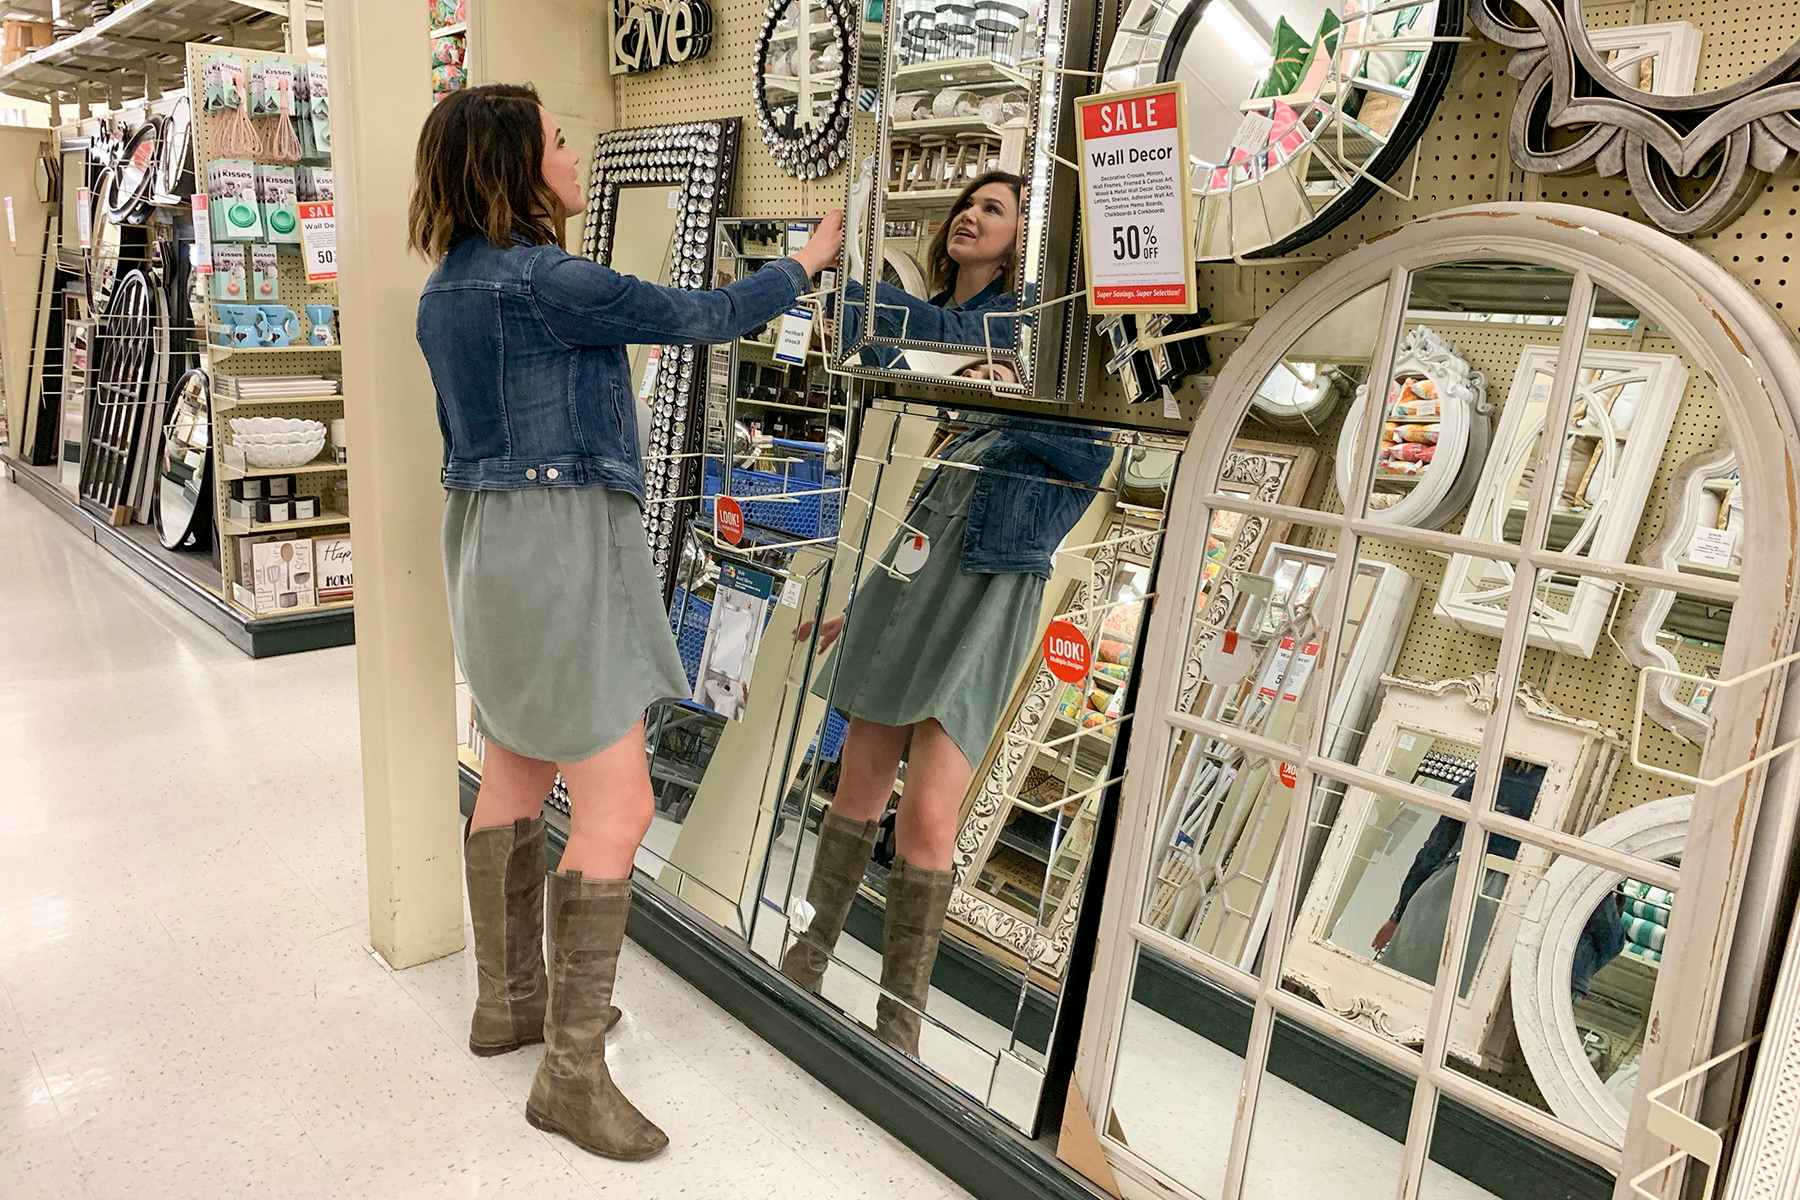 A woman looking at a mirror in an aisle filled with mirrors of varying styles and sizes.